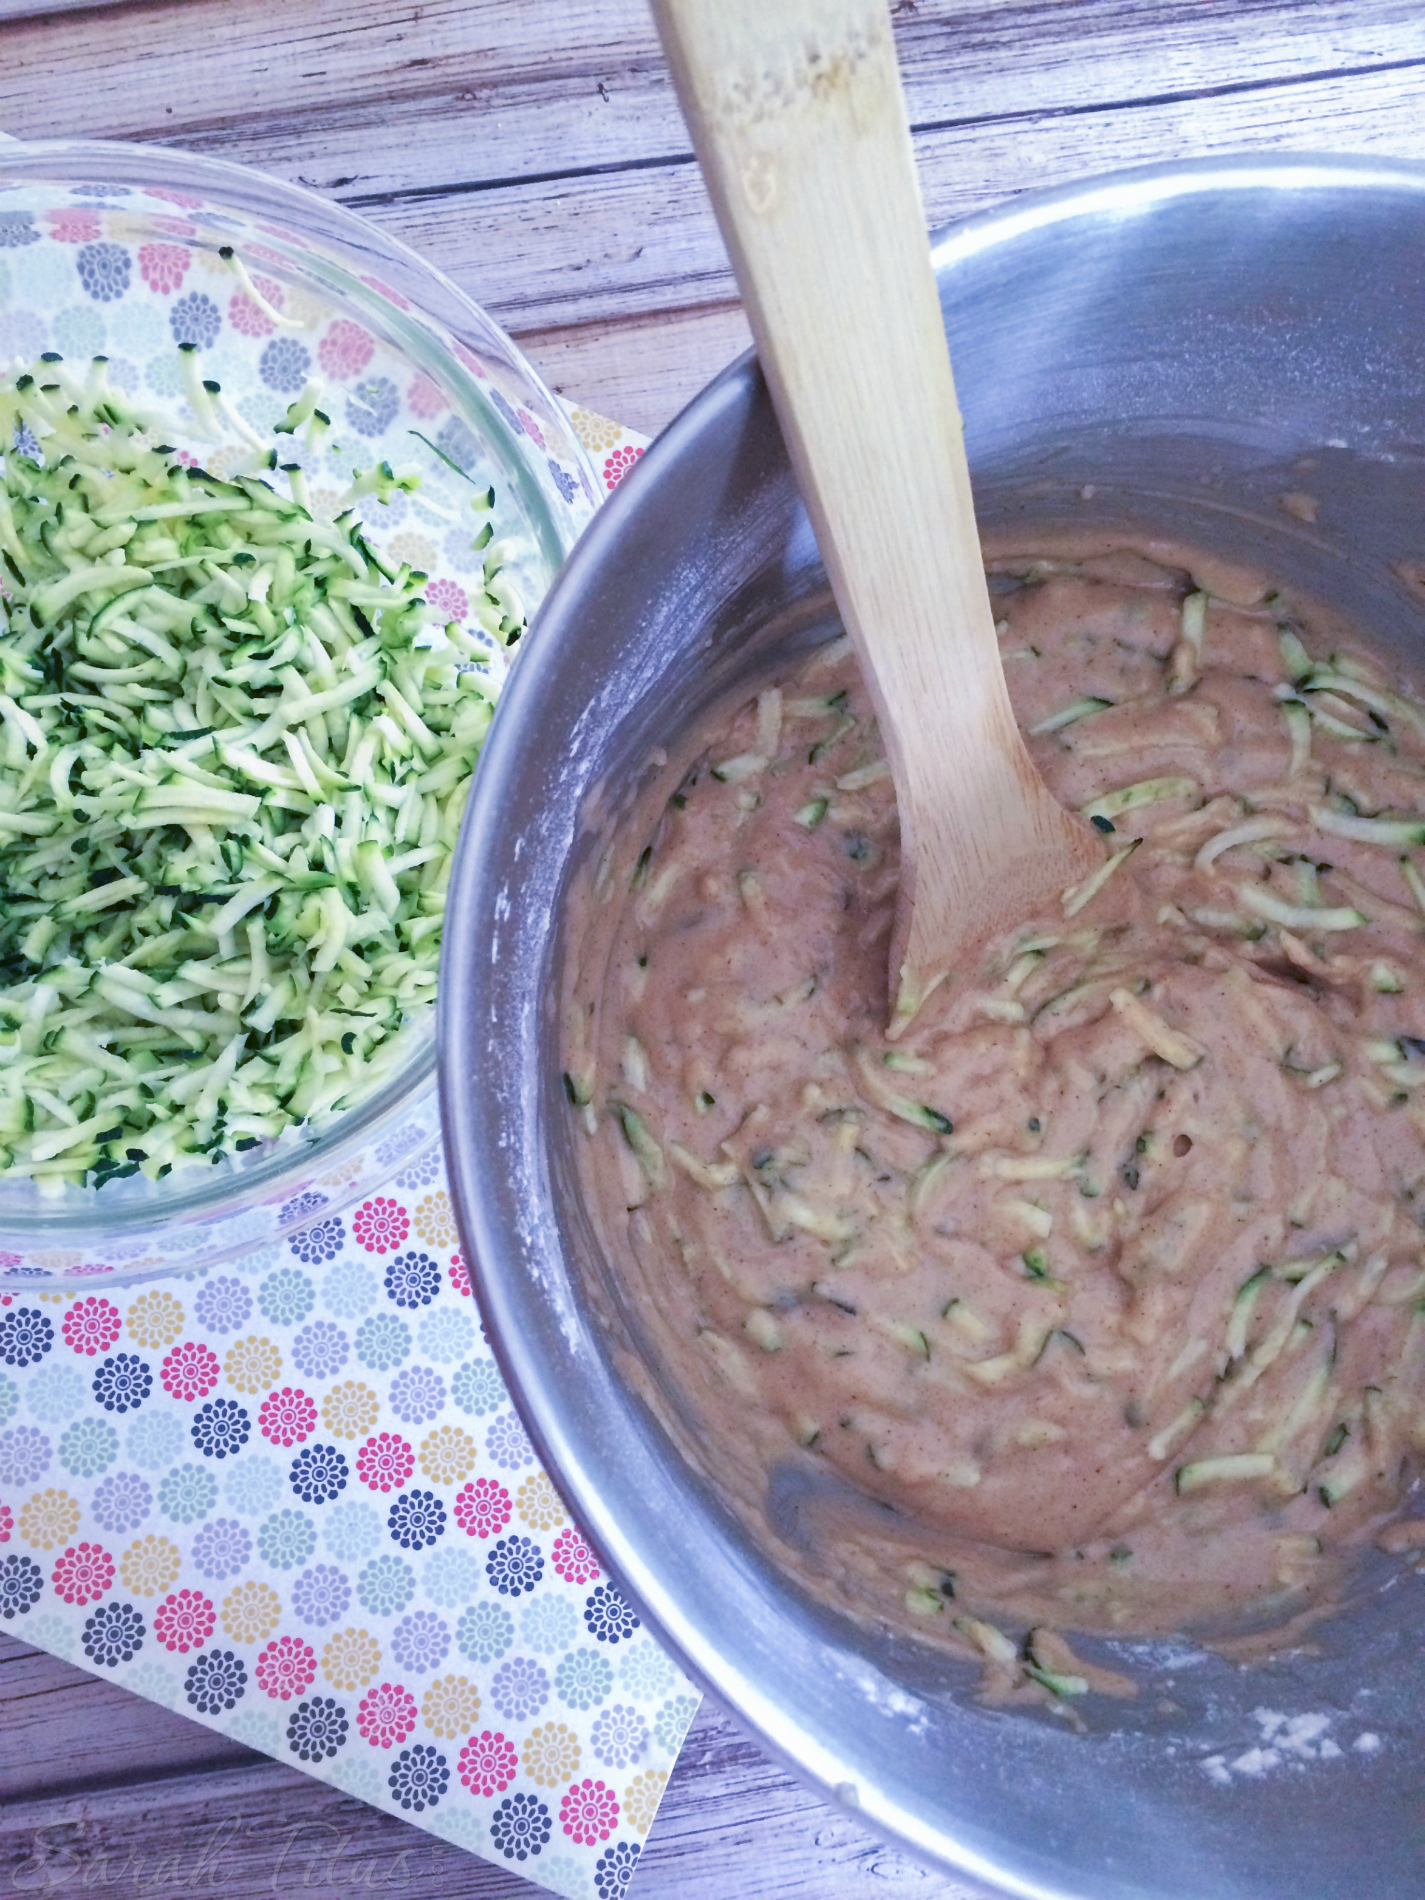 Adding the shredded zucchini to the bread batter